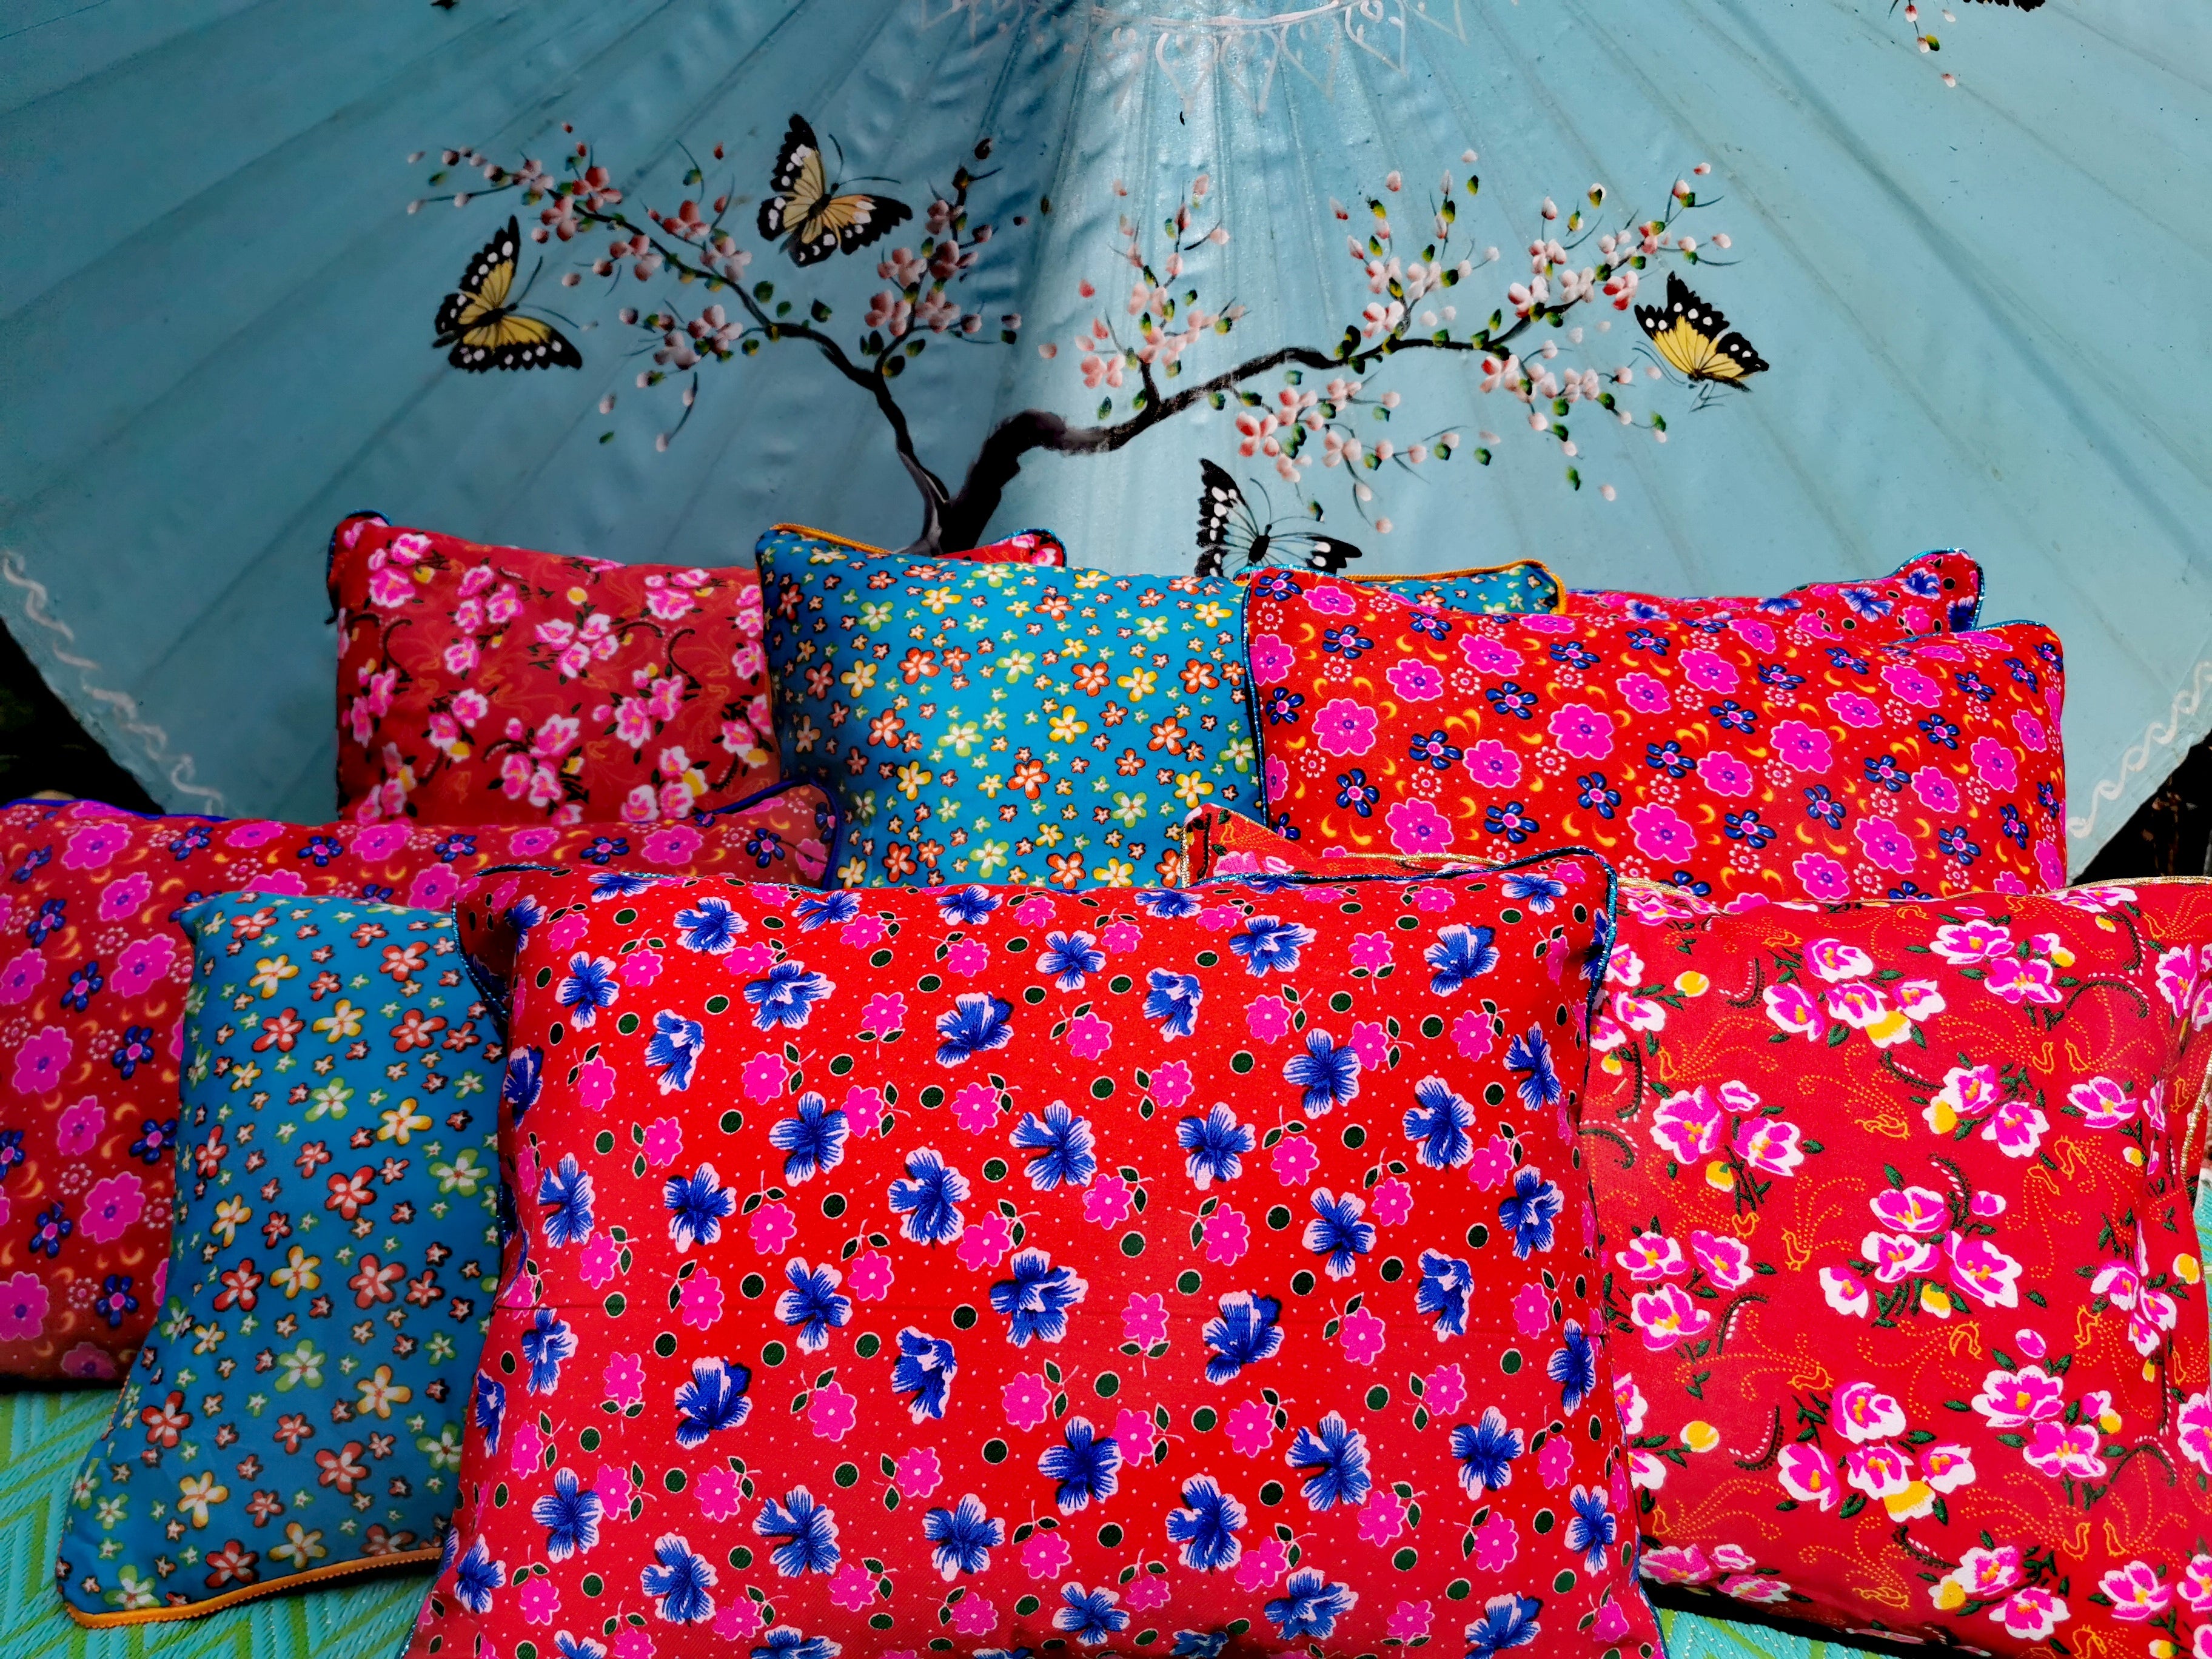 Bright and lovely folky floral fabrics used by nomadic peoples all over South and Central Asia, We love these so much that we have made them into gorgeous cushions in two sizes to mix and match on benches and sofas.

All edged with a mix of different bright or metallic piping

Mix of cotton and polycotton fabrics

